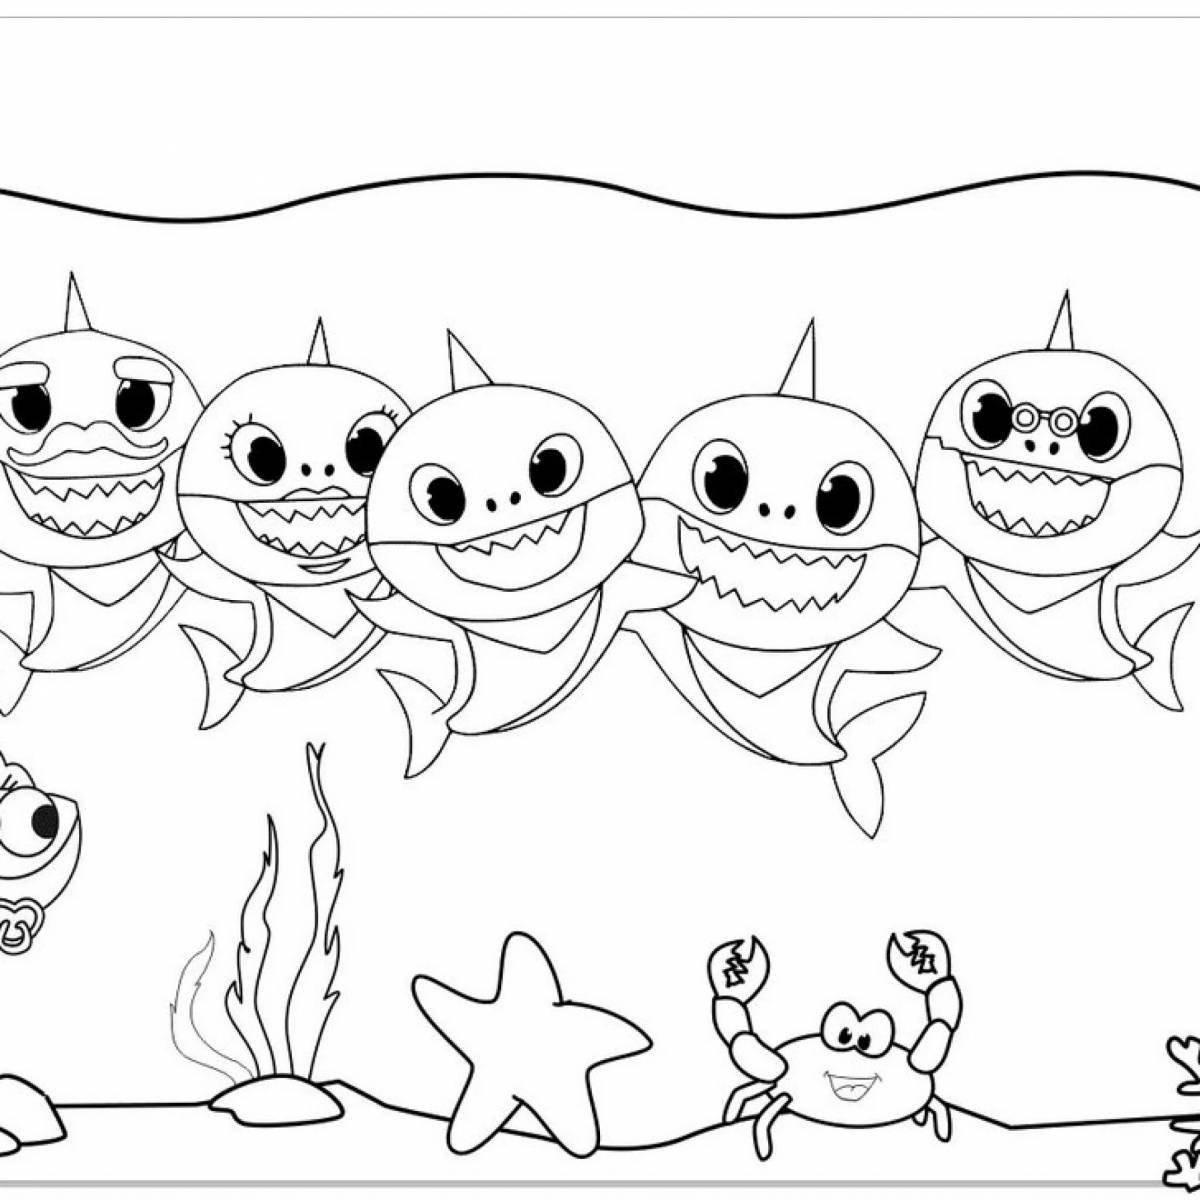 A funny shark coloring book for kids